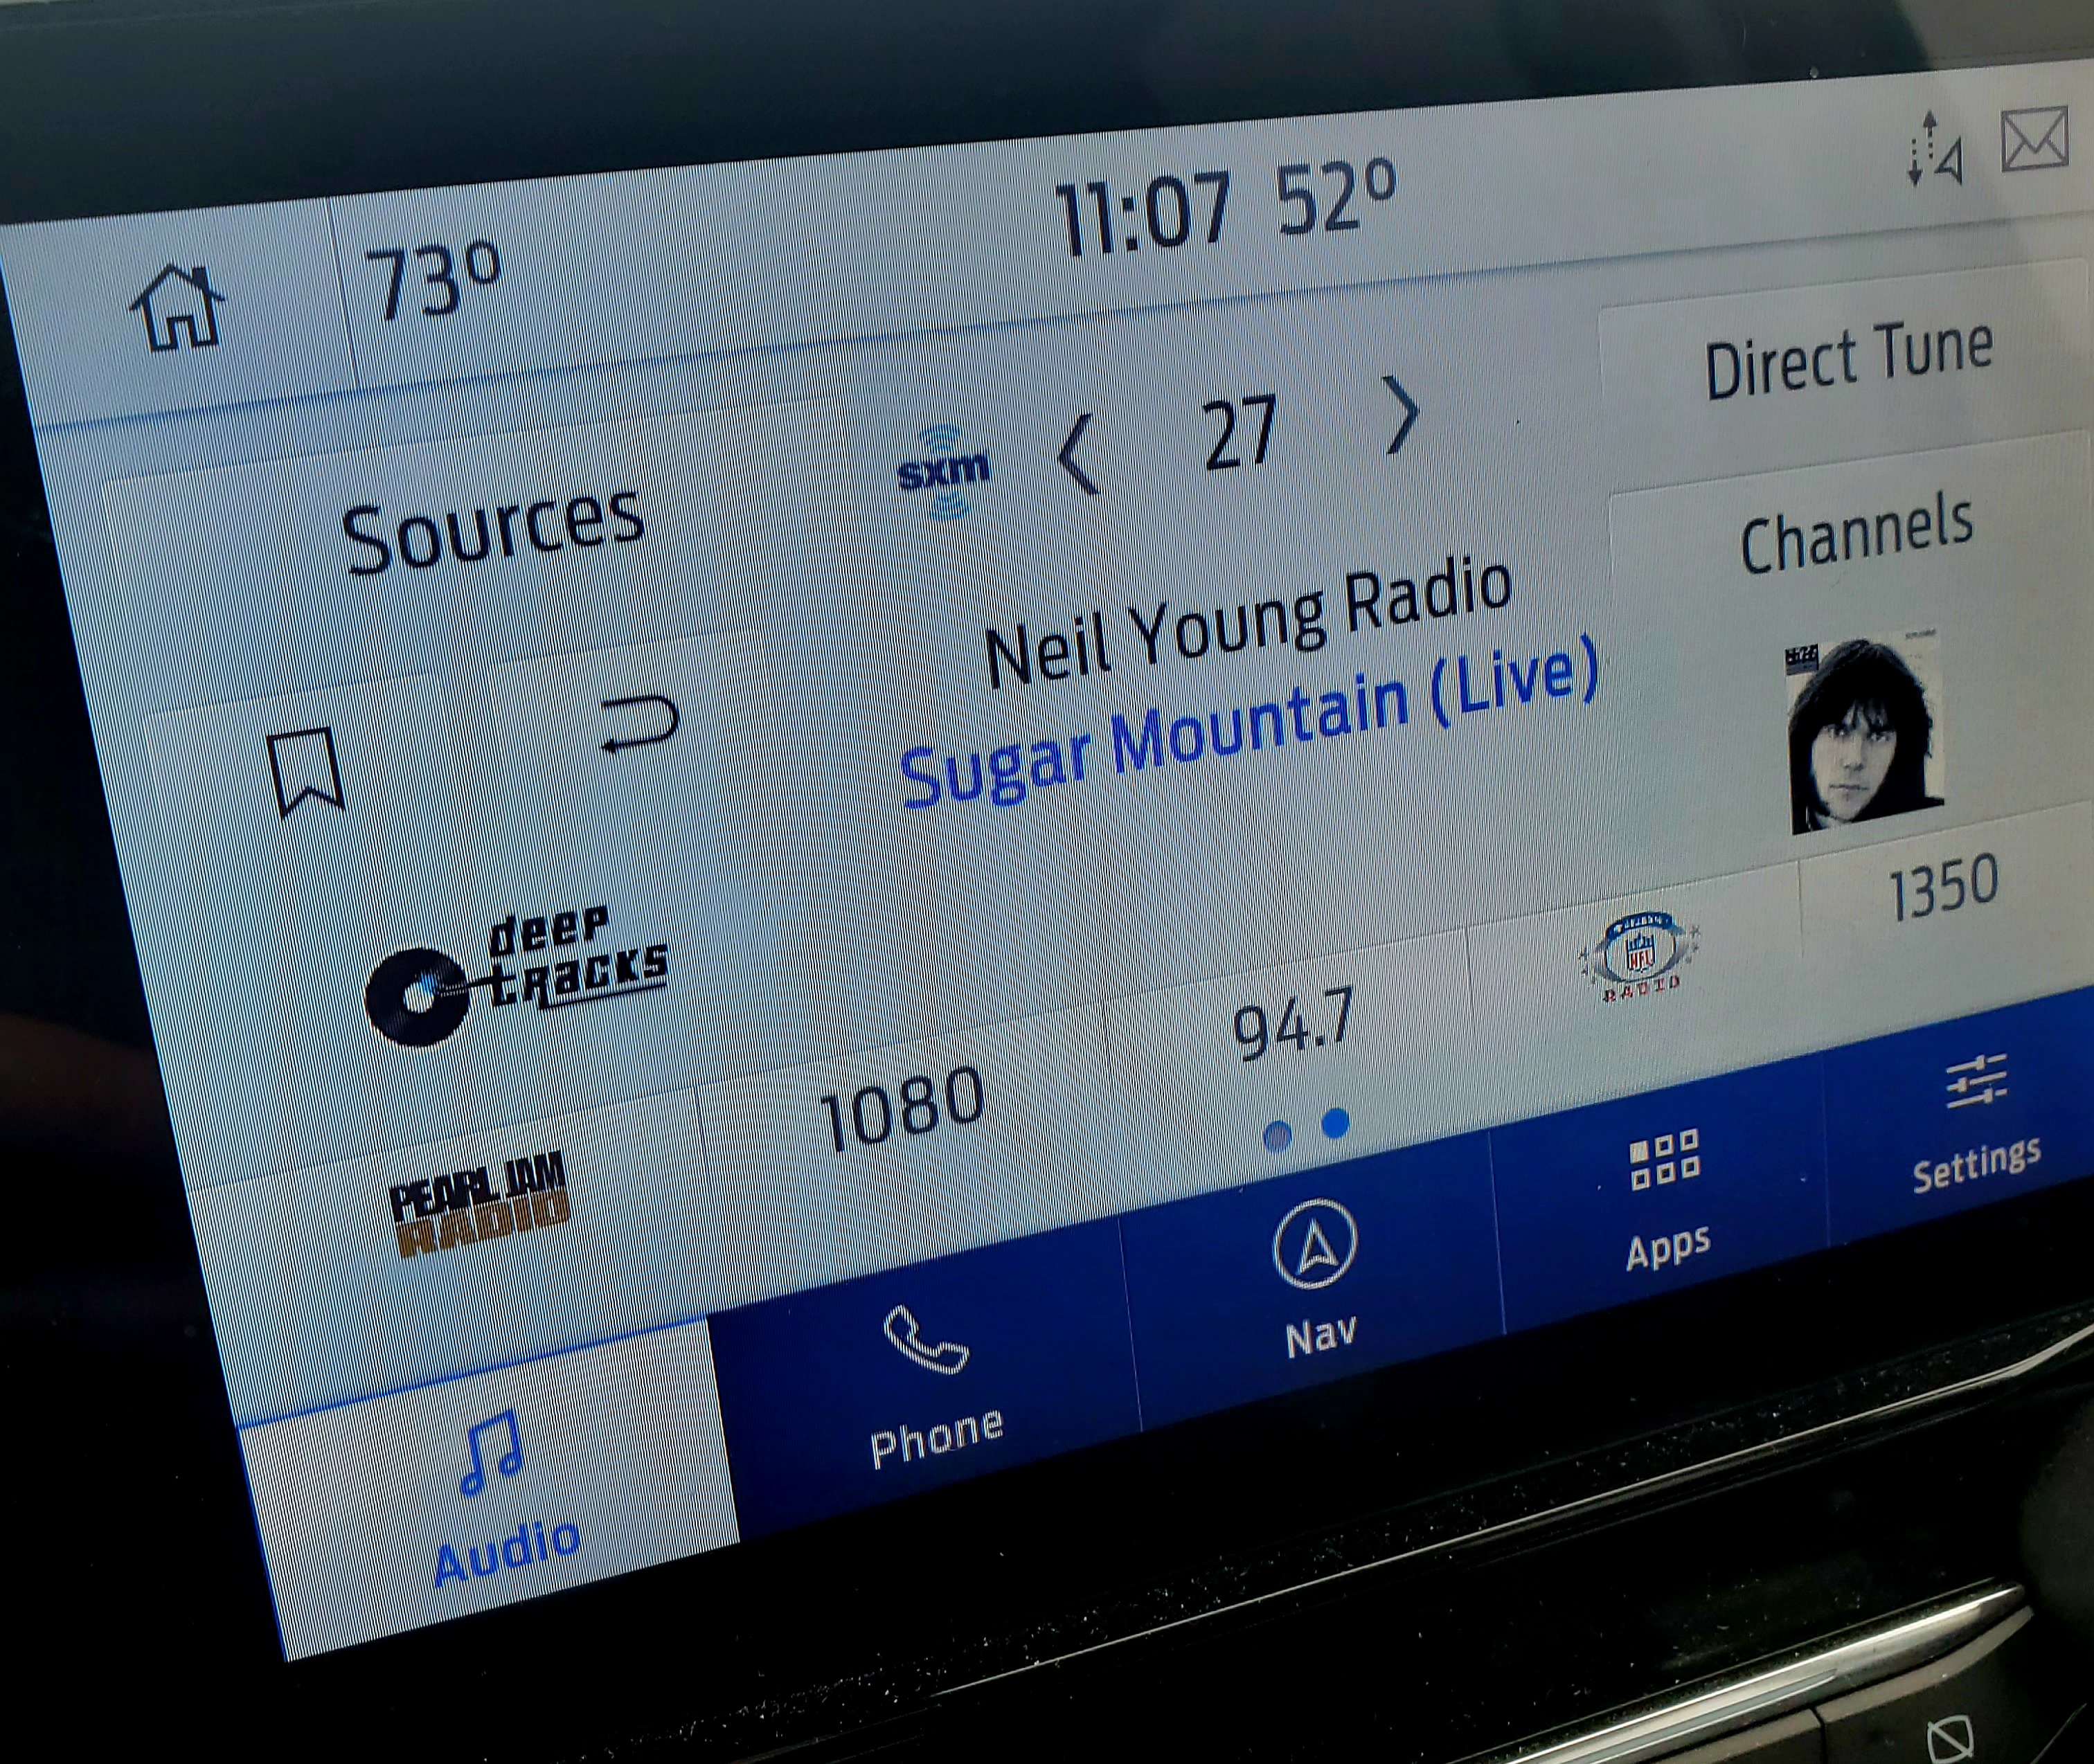 Sirius XM is among the services that is offering Neil Young's music after the recording artist's rift with Spotify